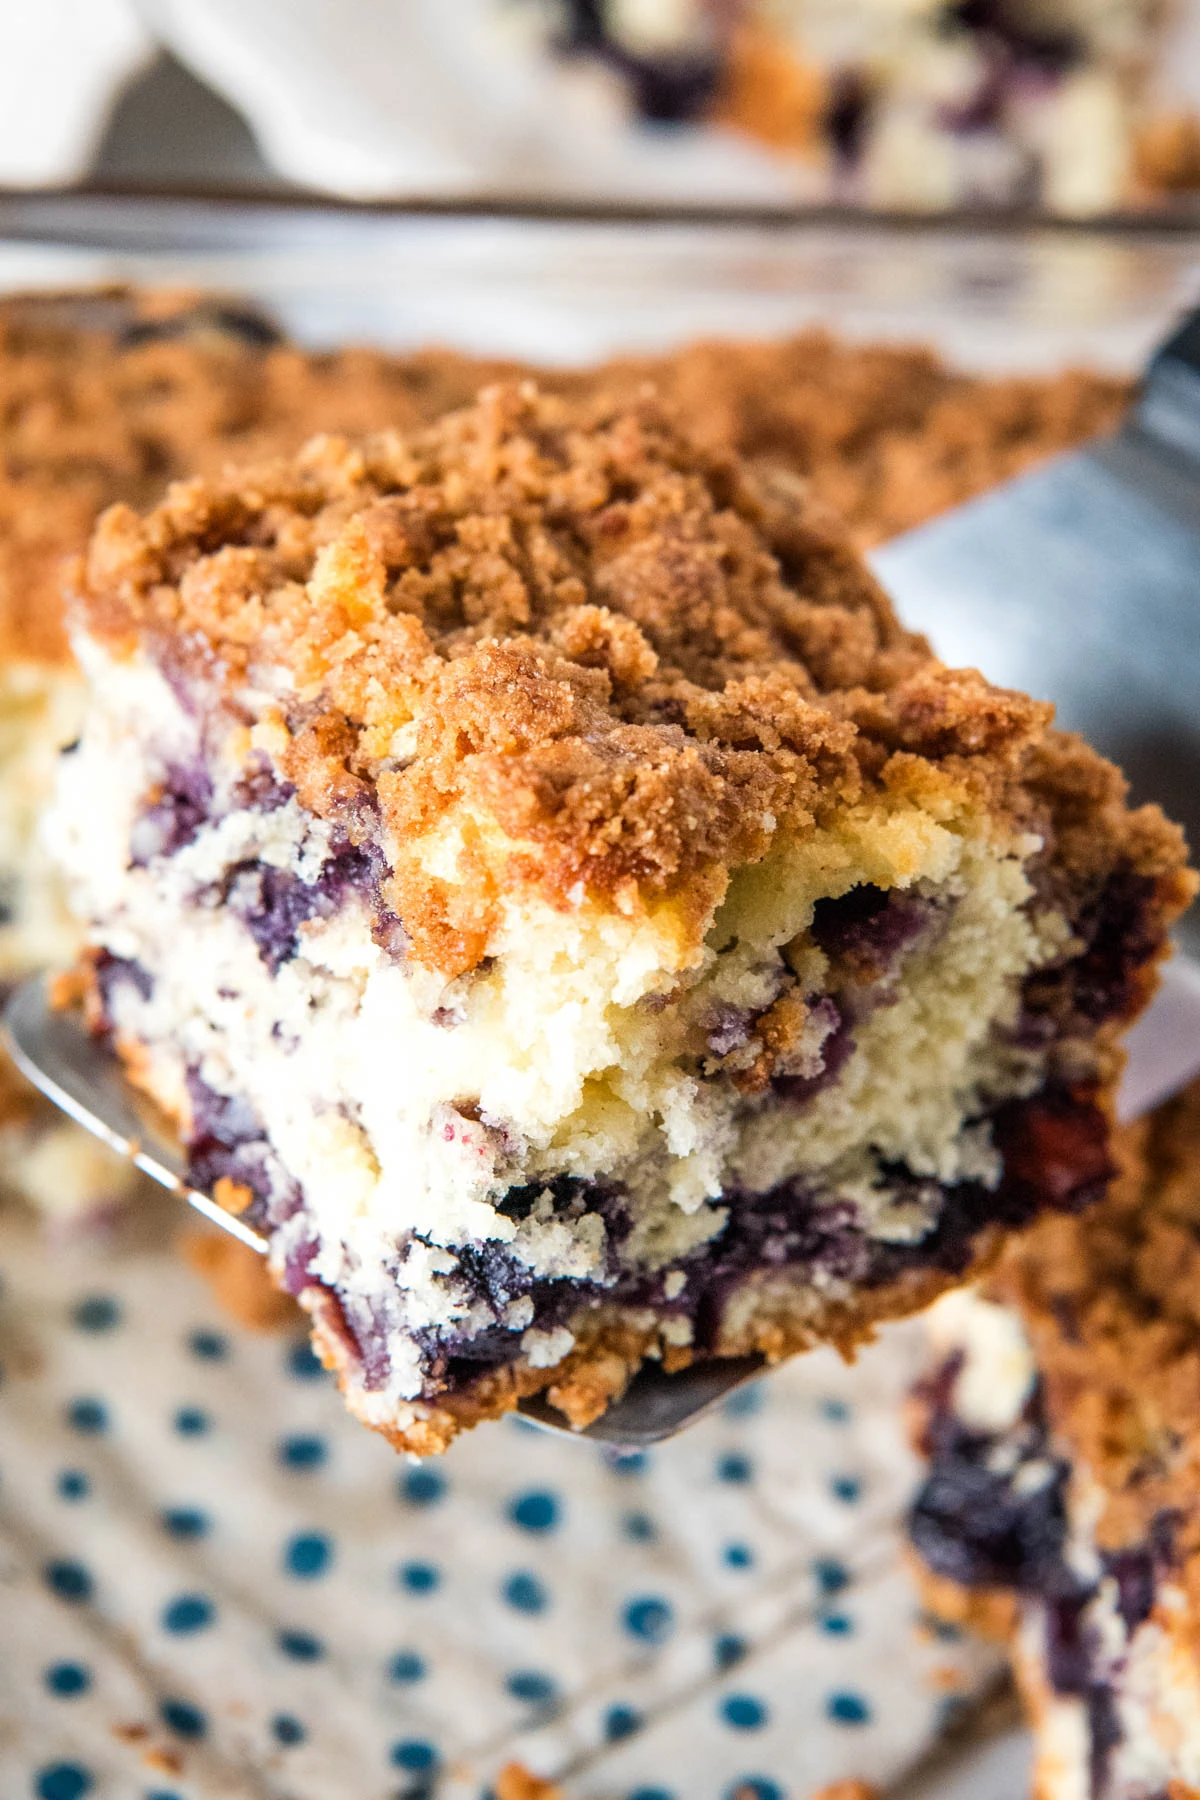 sliced square of blueberry coffee cake with a brown sugar streusel topping on a small silver spatula over a large glass baking dish full of cake